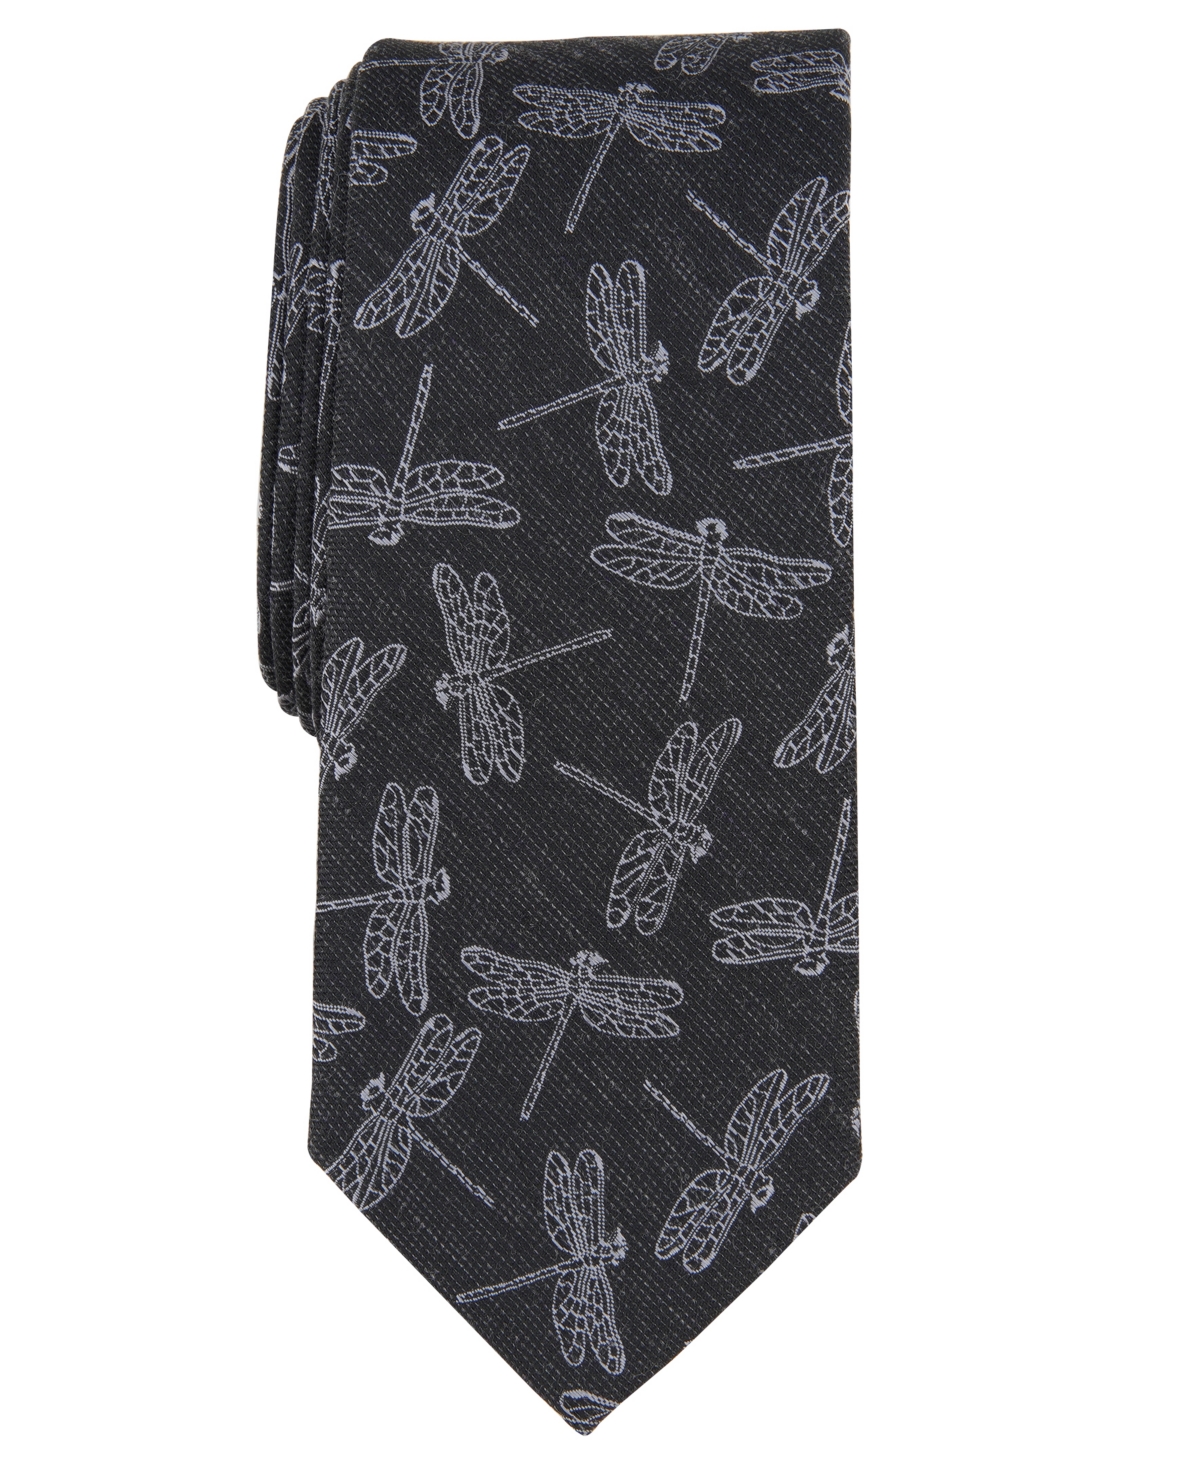 Men's Dragonfly Tie, Created for Macy's - Black